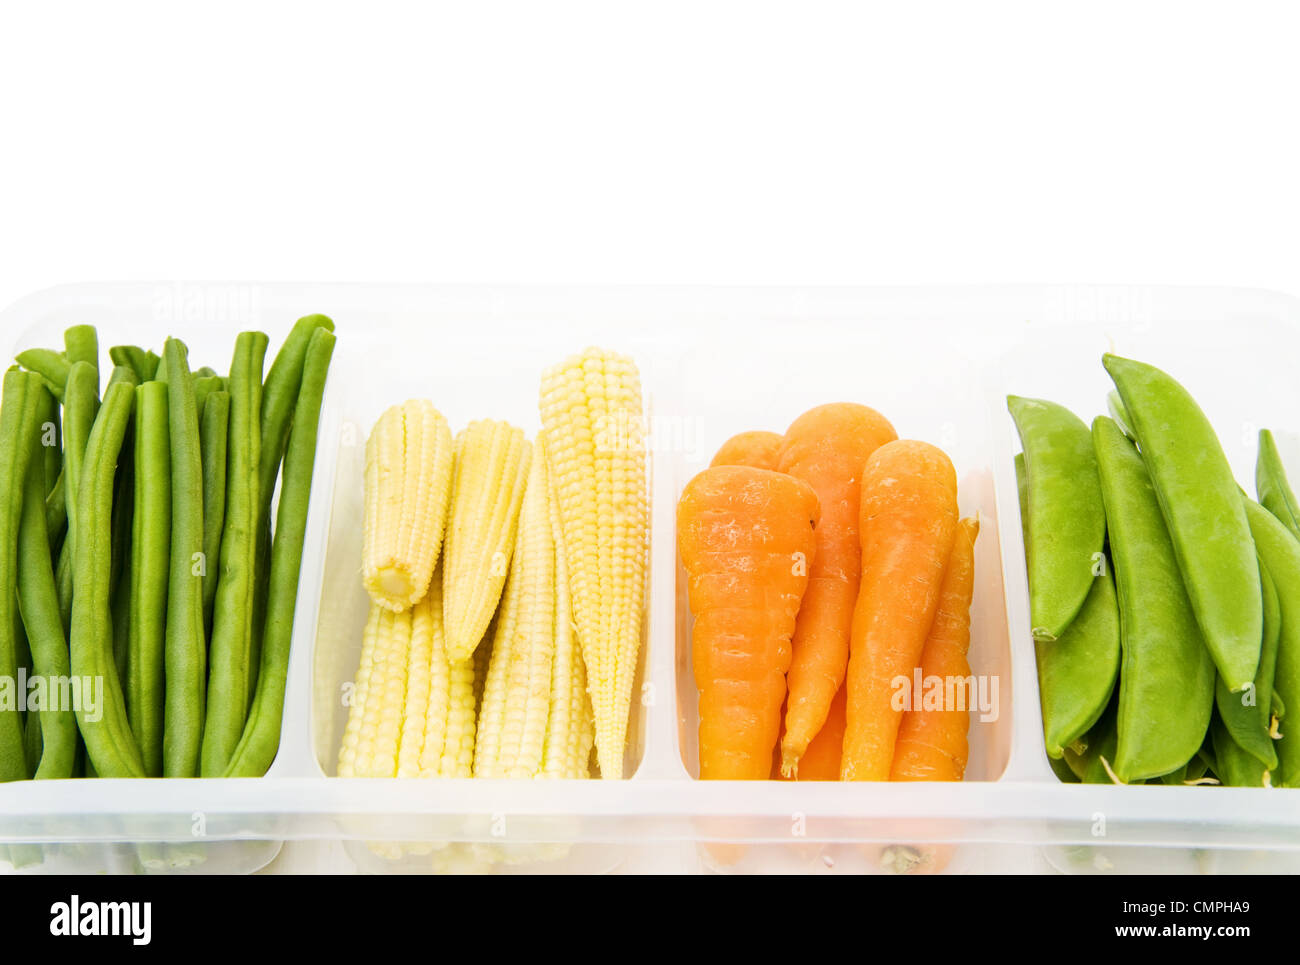 Fresh baby vegetables - carrots, beans, corn, in a casserole. Isolated over white. Stock Photo